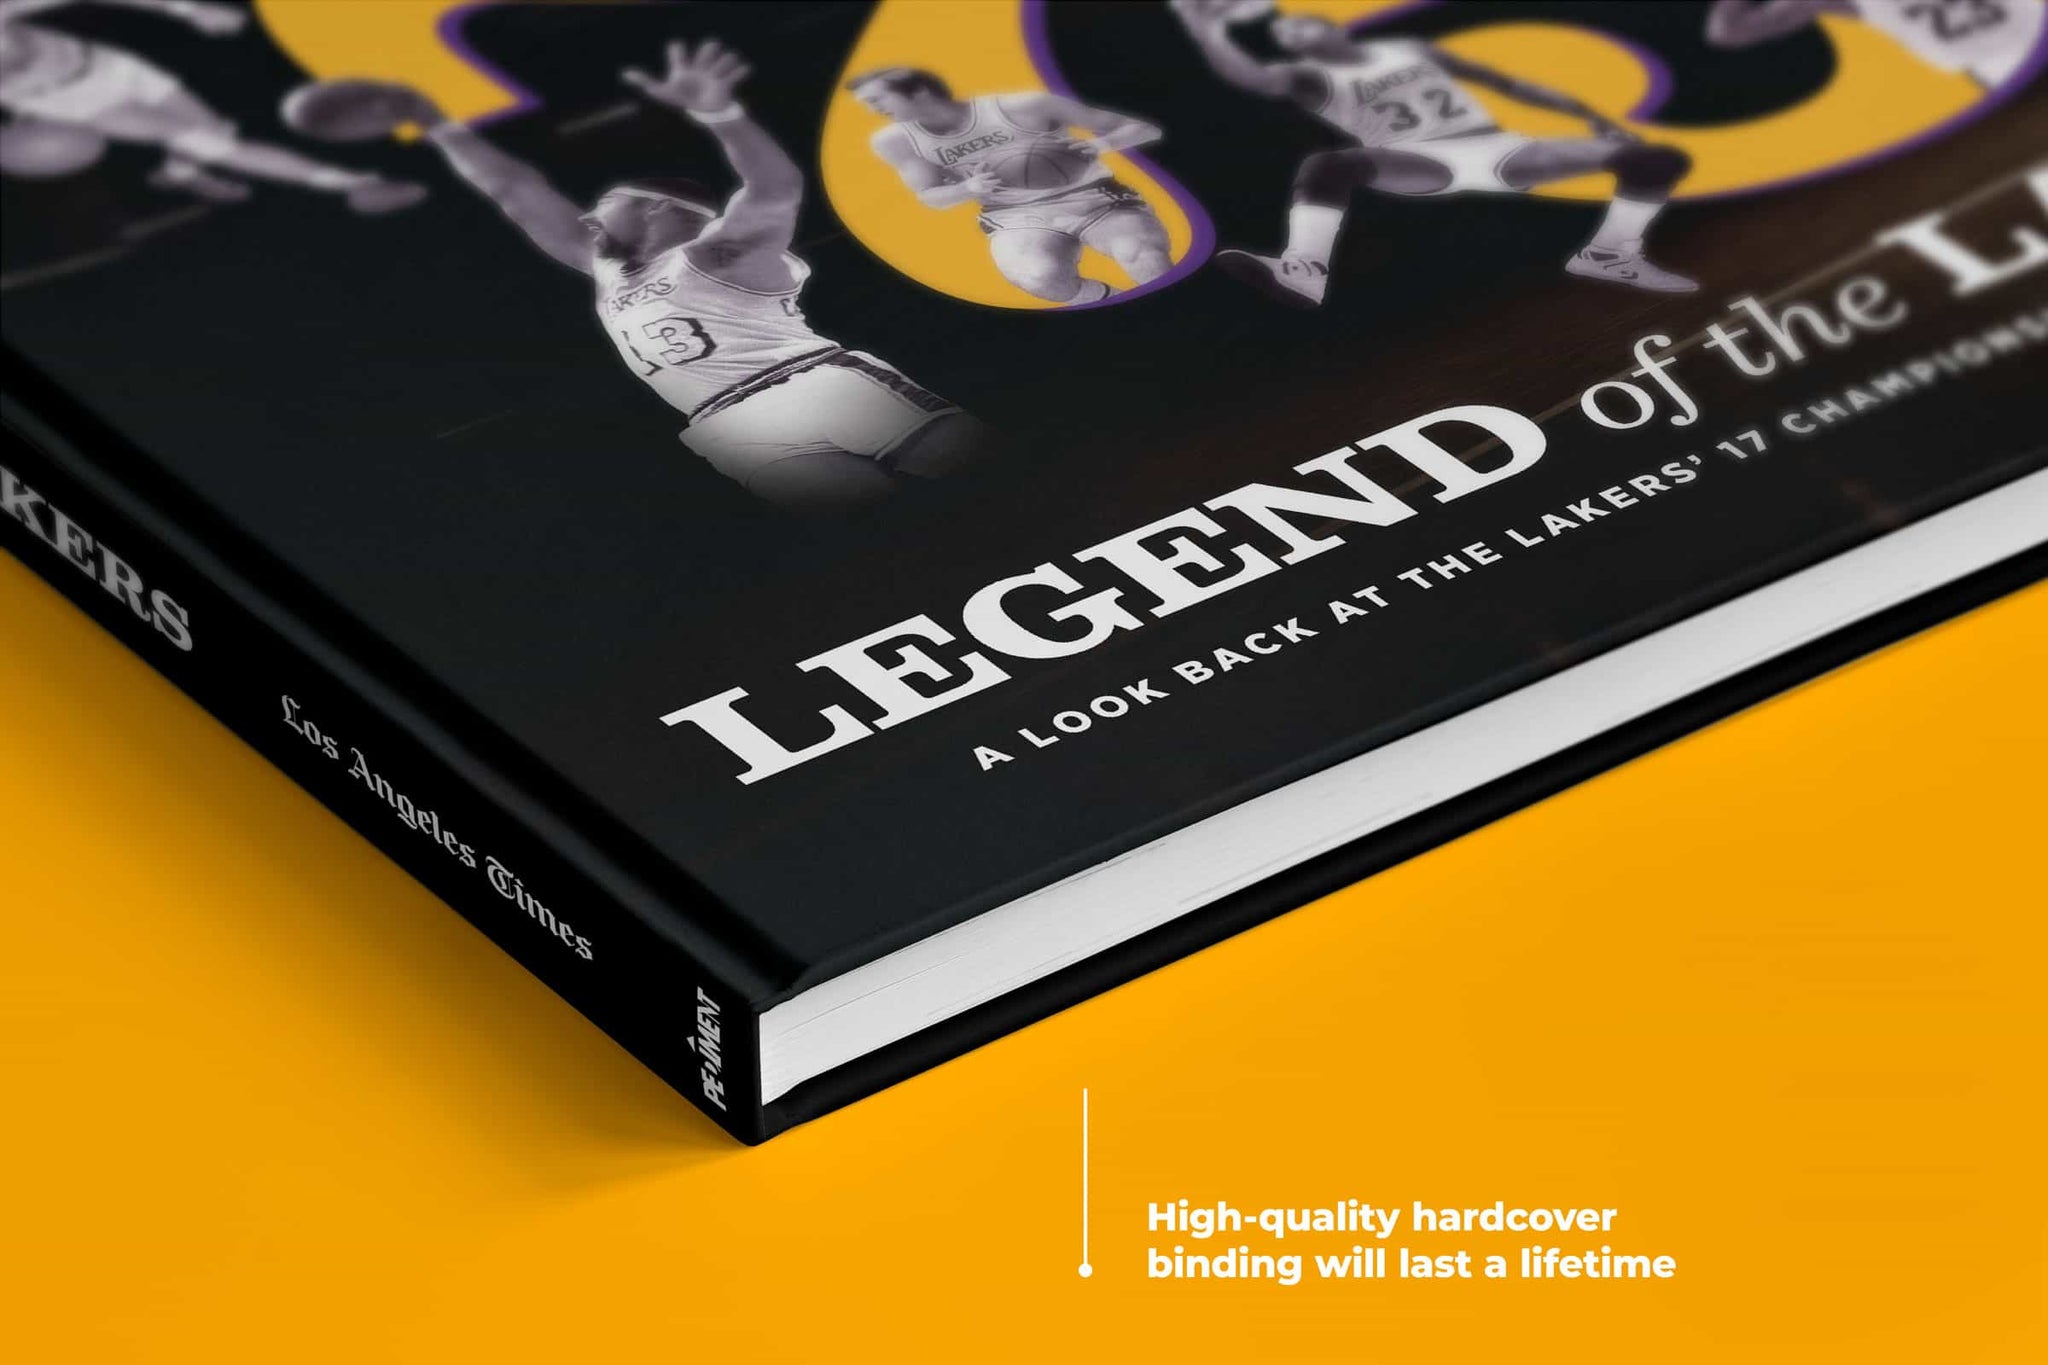 75 Years of Lakers Basketball in a Hardcover Collector's Book